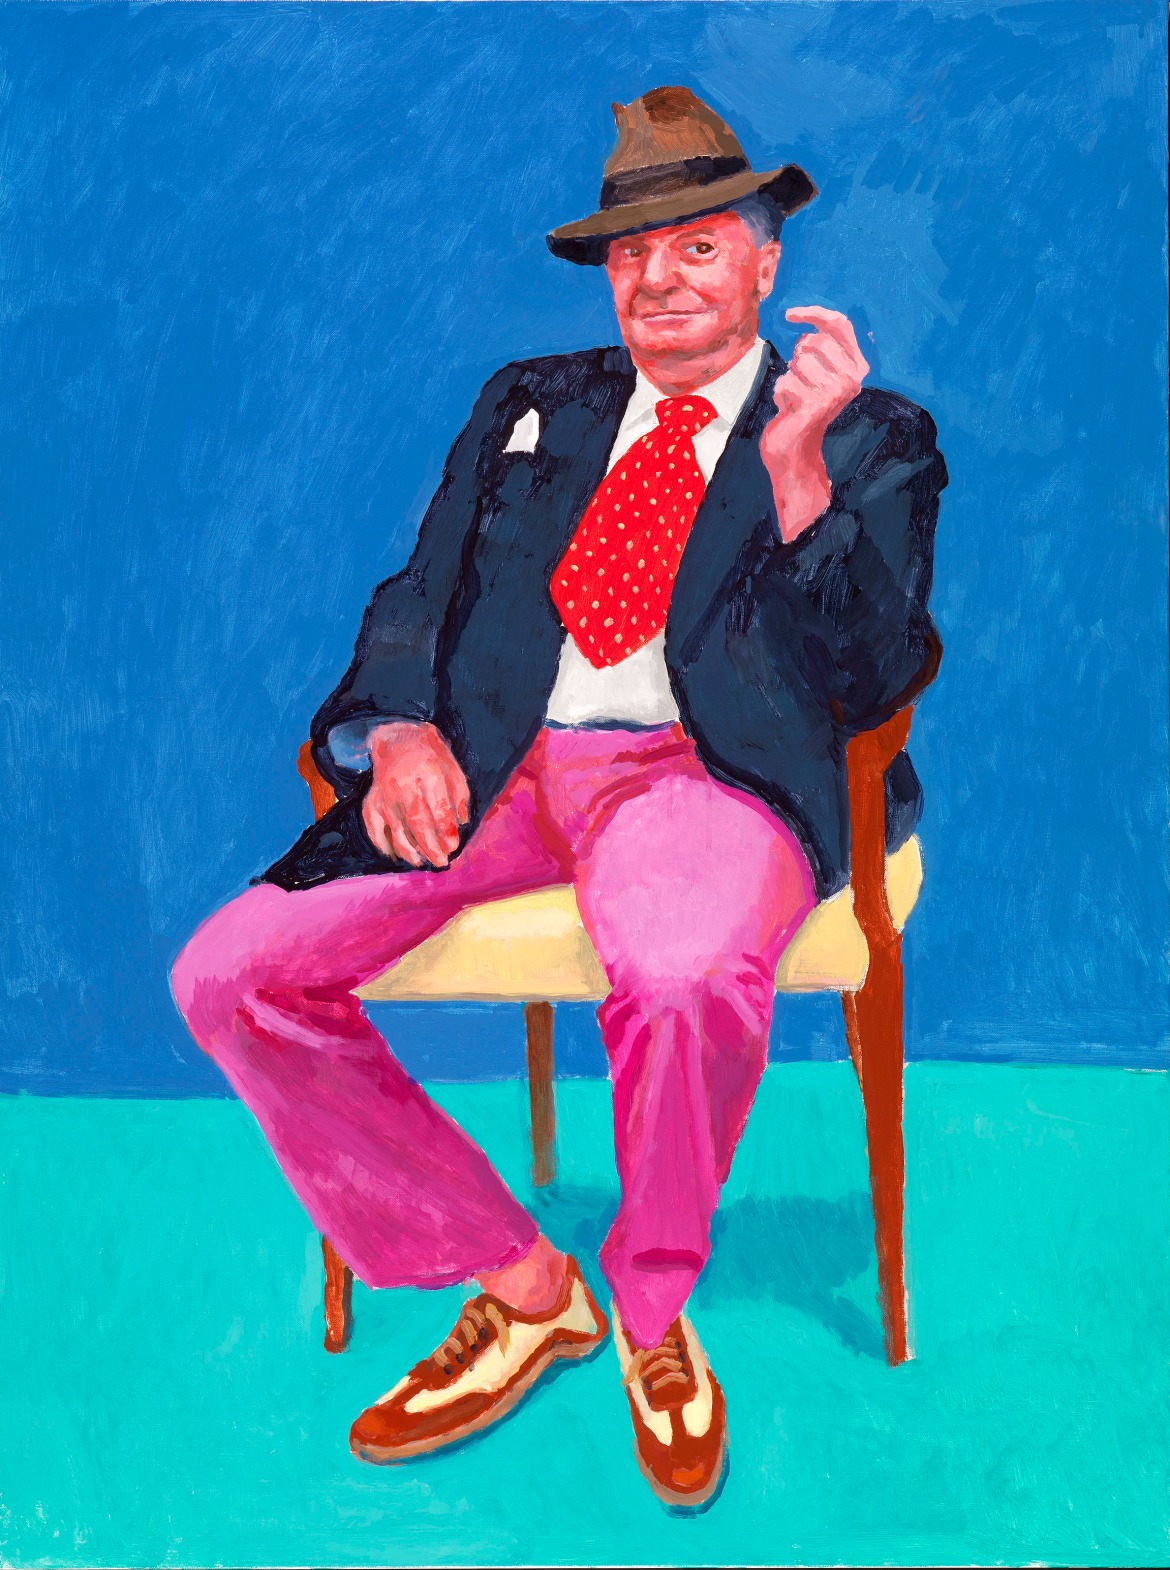 "Barry Humphries, 26-28 March" 2015, Acrylic on canvas, 48 x 36" by David Hockney. Photo Credit: ©Richard Schmidt. 